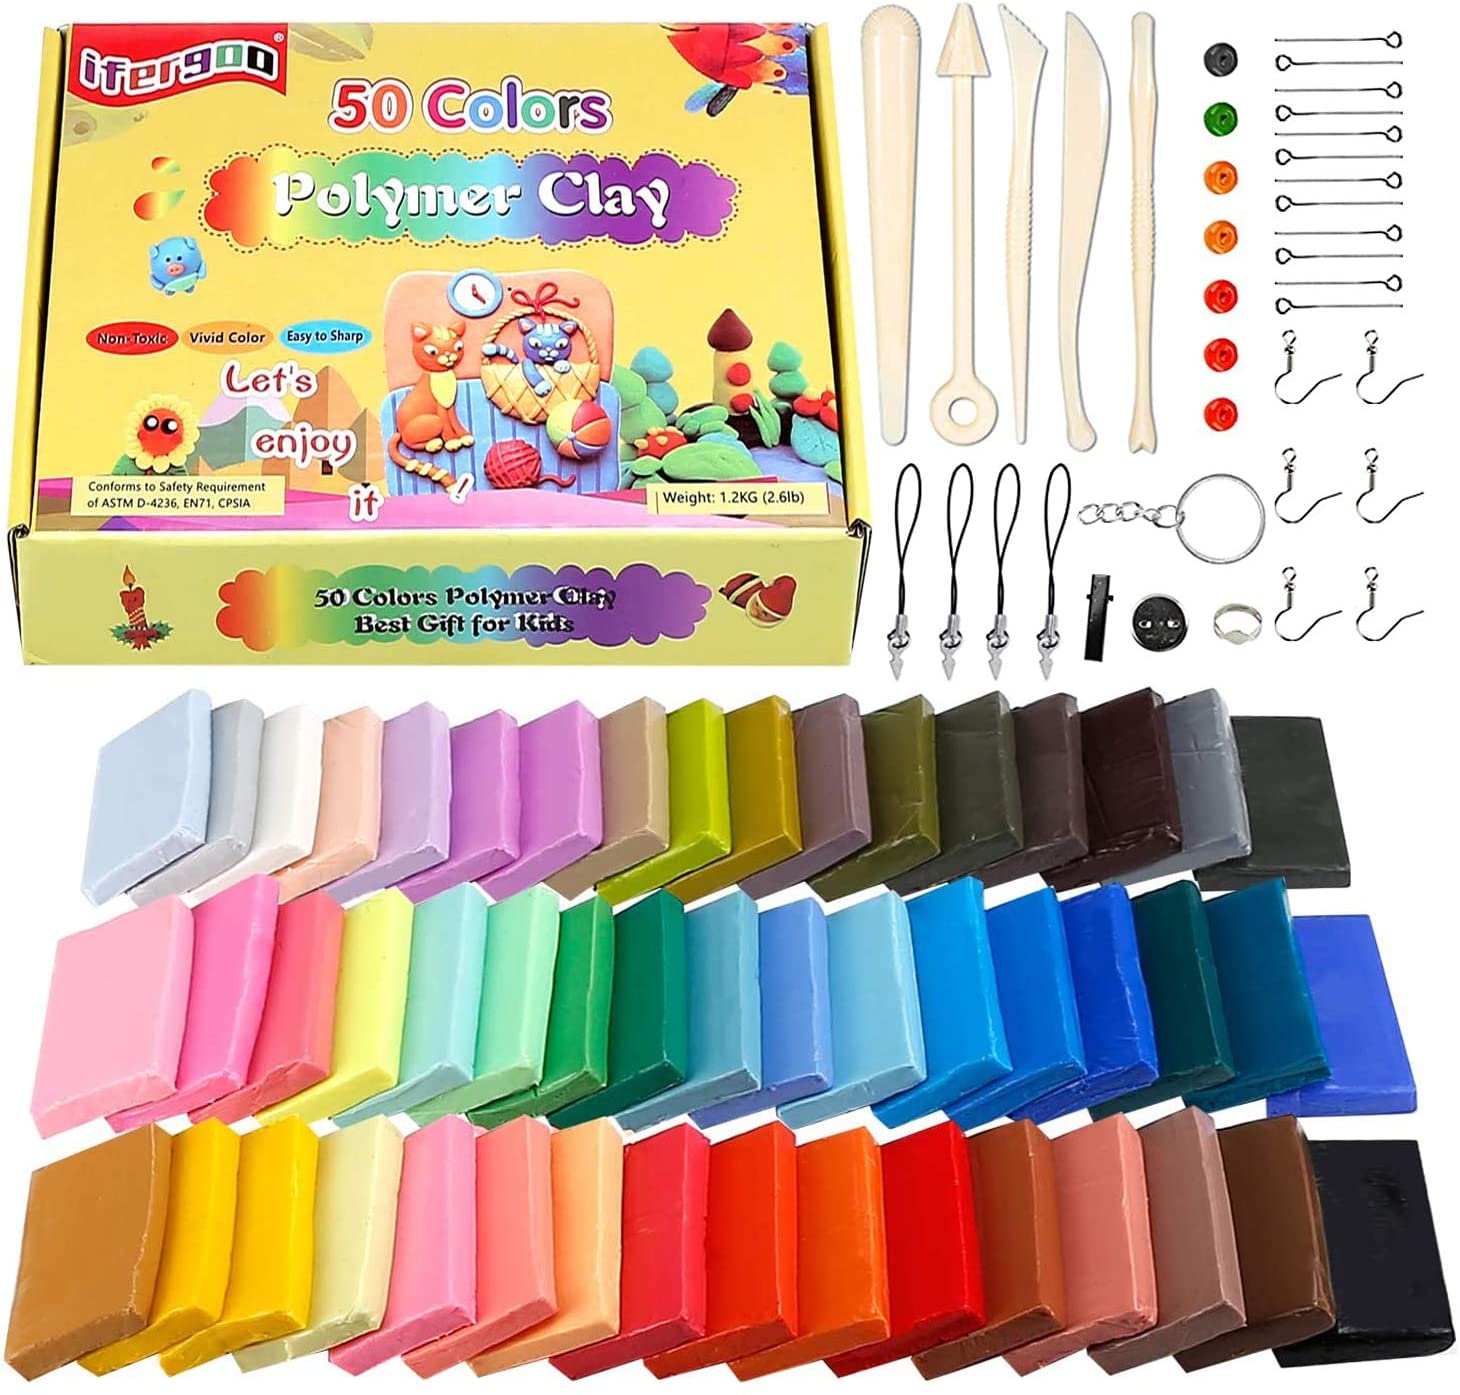 Polymer Clay Kit, 56 Colors Modeling Clay, DIY Oven Bake Molding Clay for  Kids w